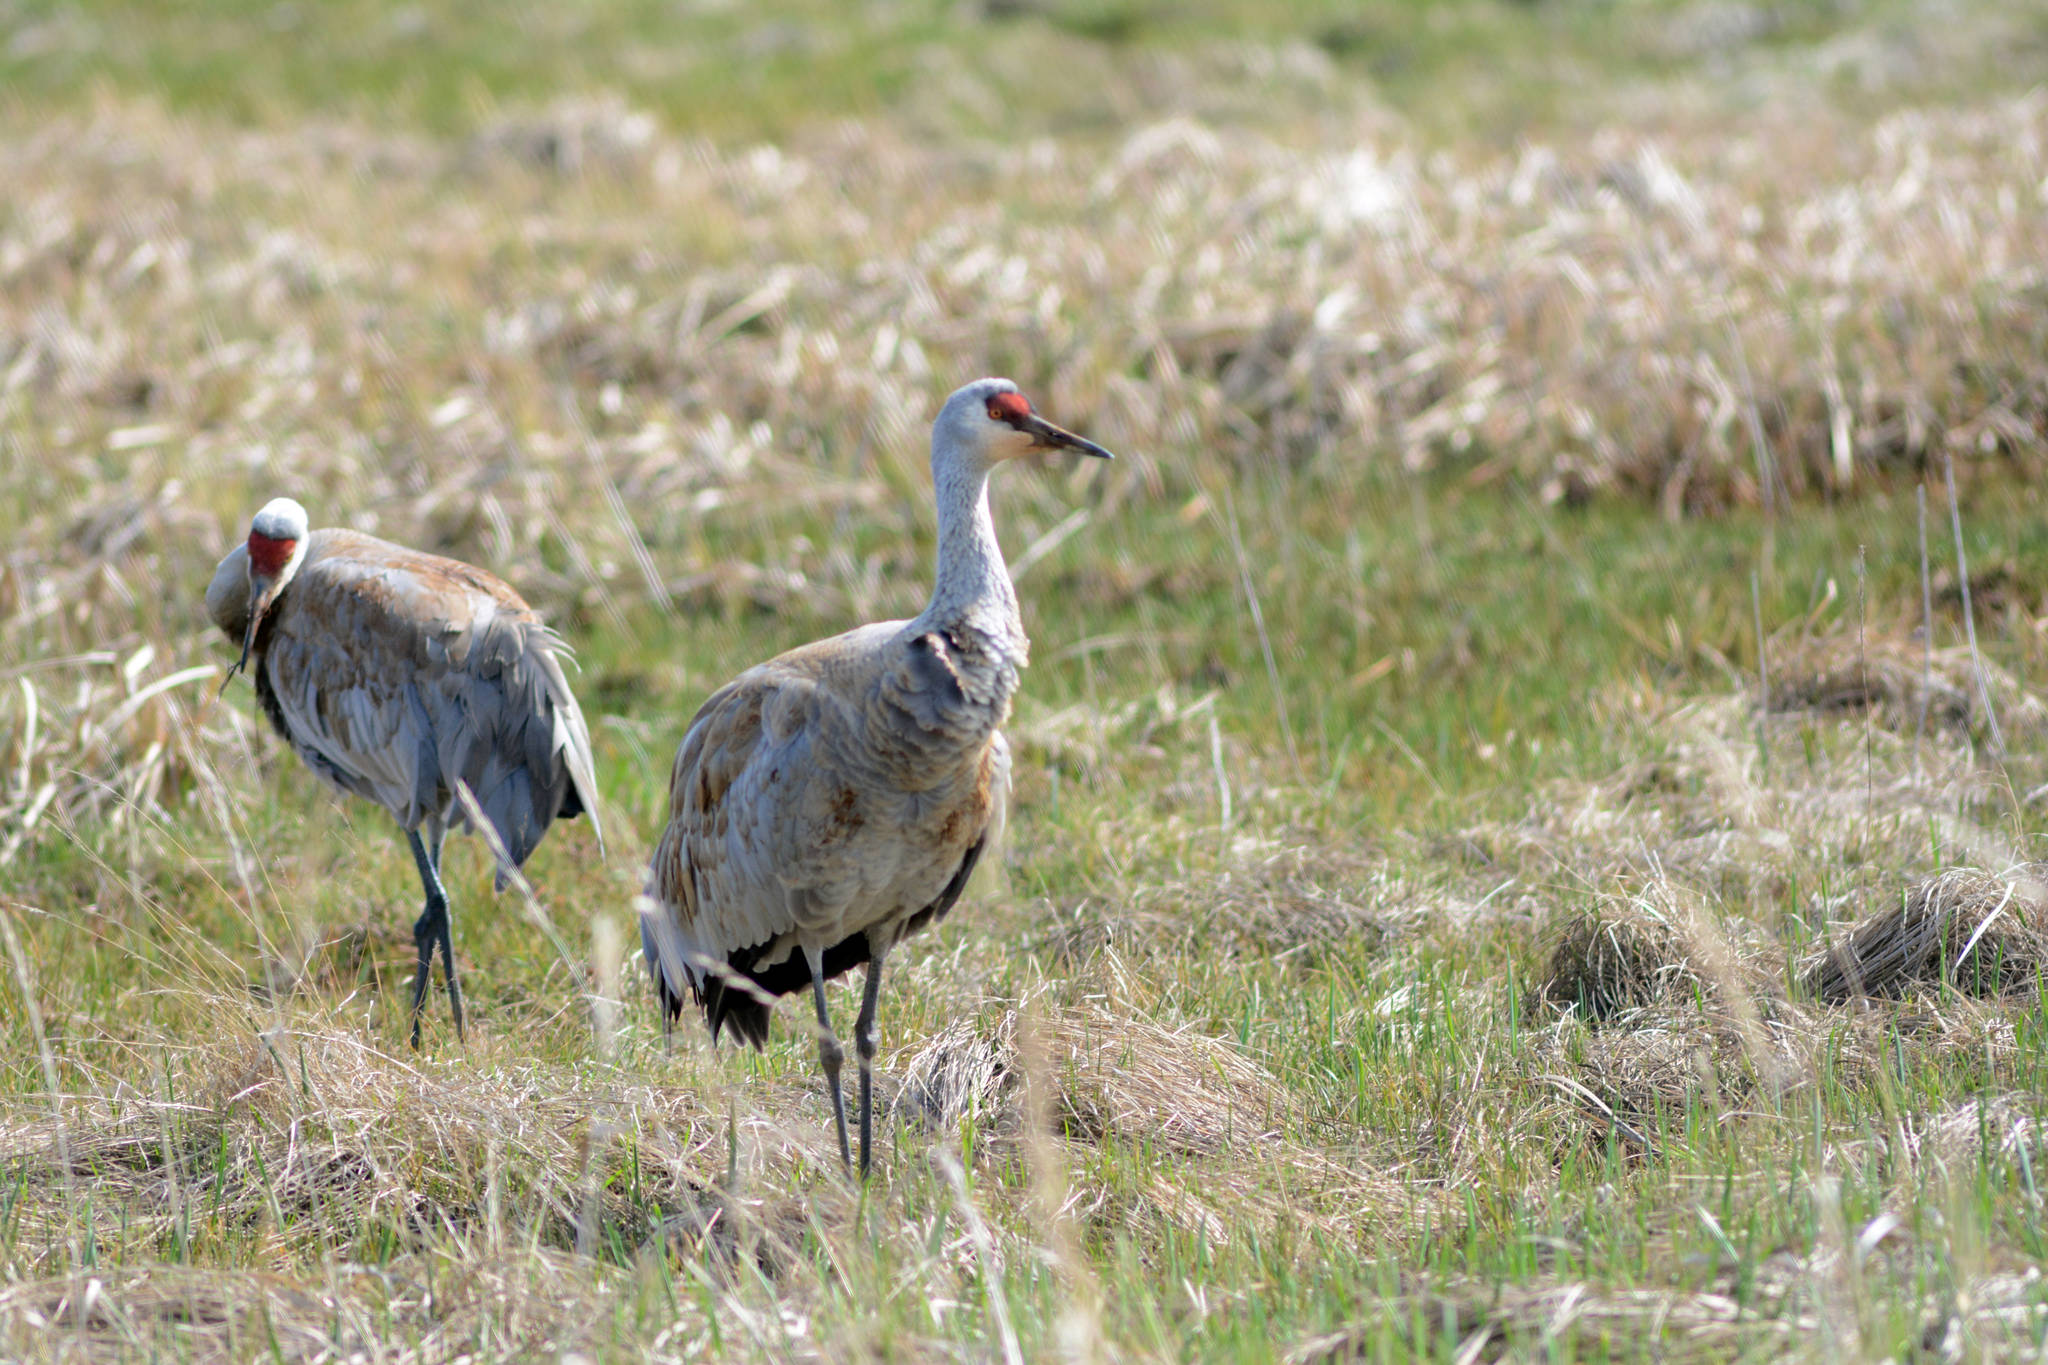 Sandhill cranes feed in Beluga Slough on May 11, 2019, in Homer, Alaska, during the Kachemak Bay Shorebird Festival. (Photo by Michael Armstrong/Homer News)